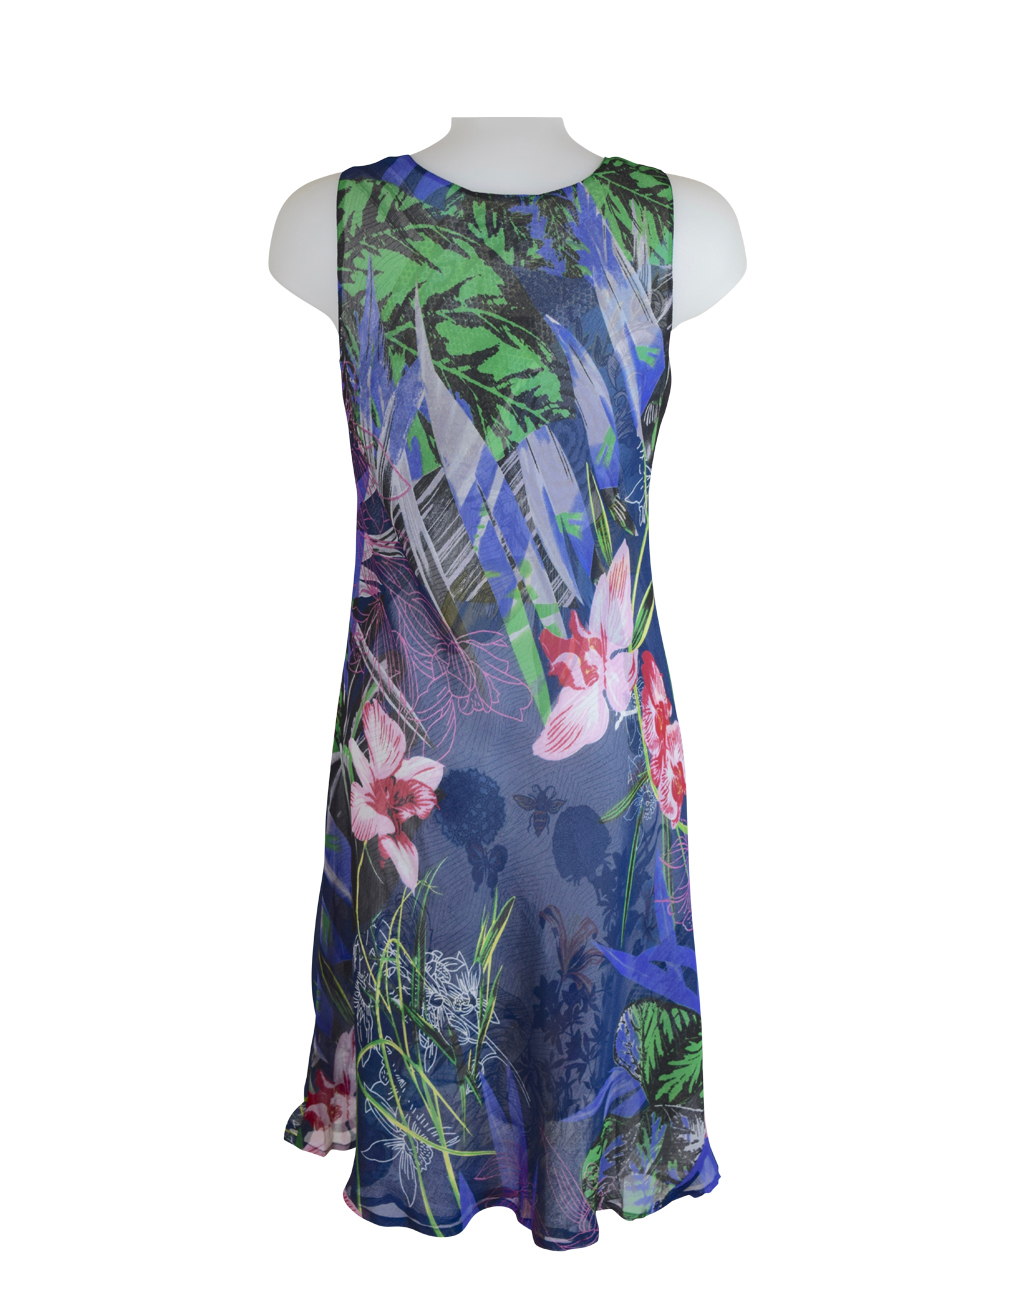 Reversible 2 in 1 Dresses, Perfect for Cruises, Holidays, Space Saving